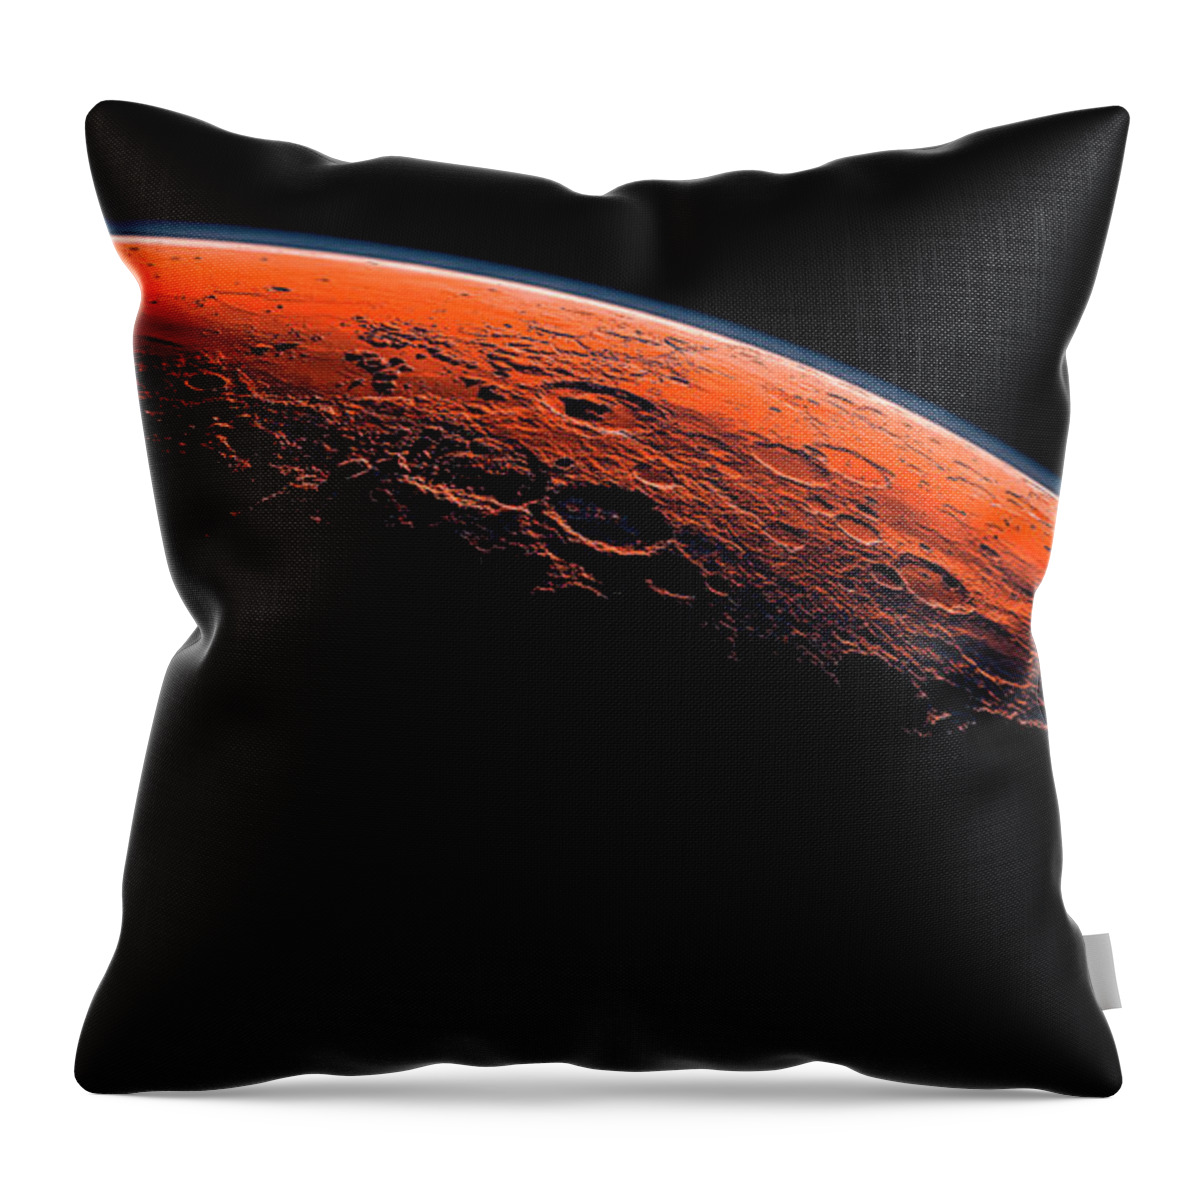 Astronomy Throw Pillow featuring the digital art Mars Planet by Mango Art